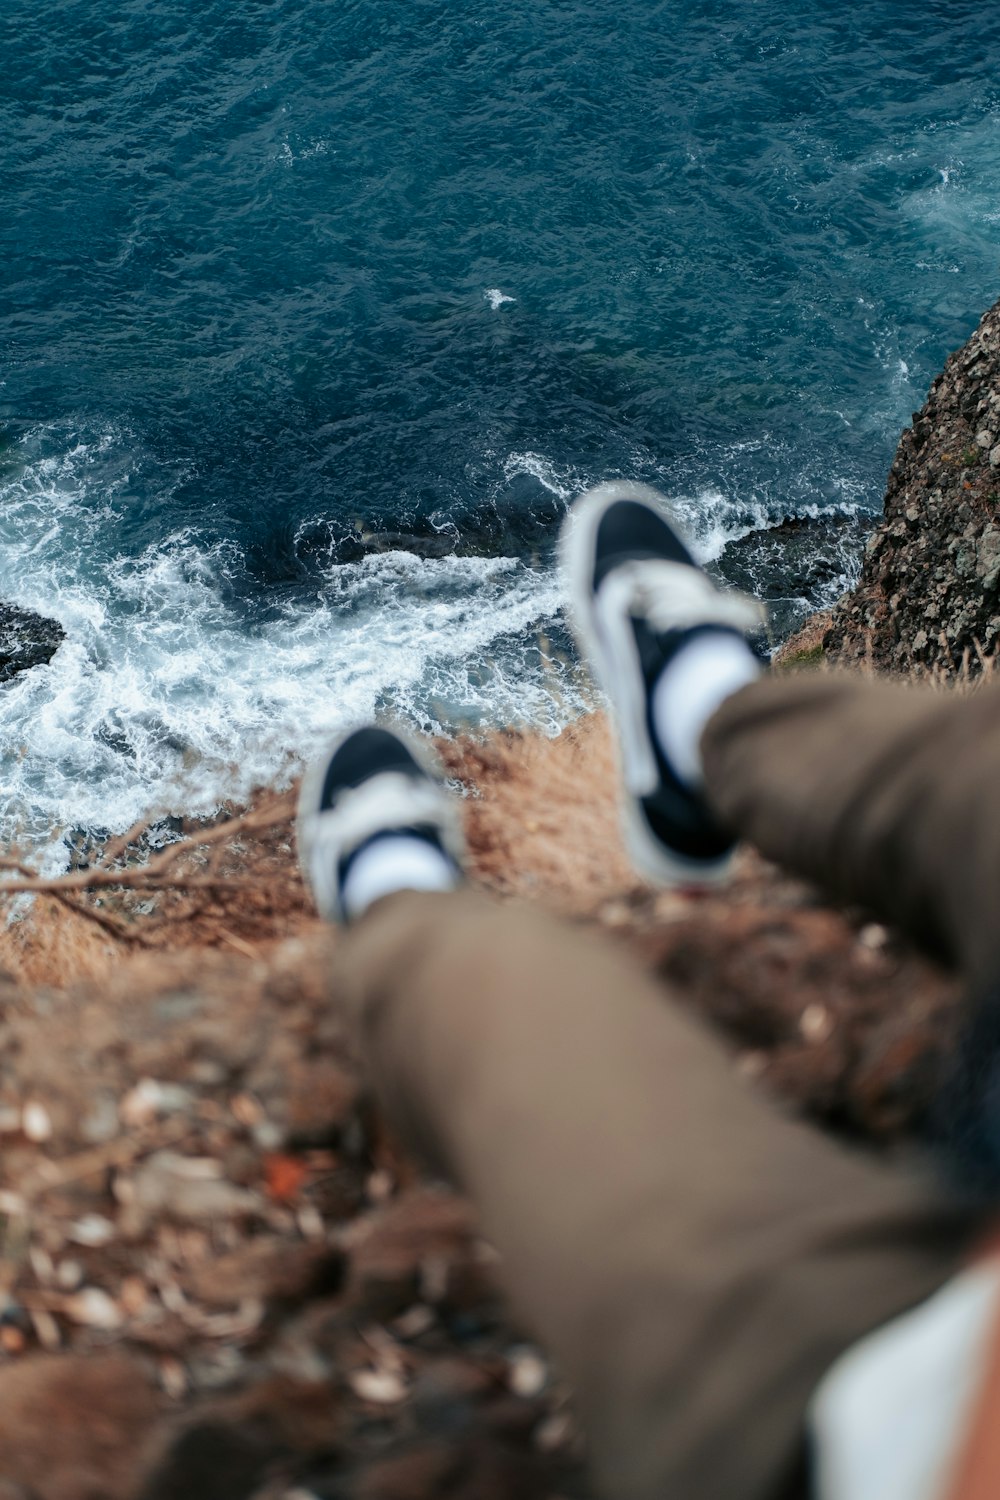 a person's feet on a rock by a body of water